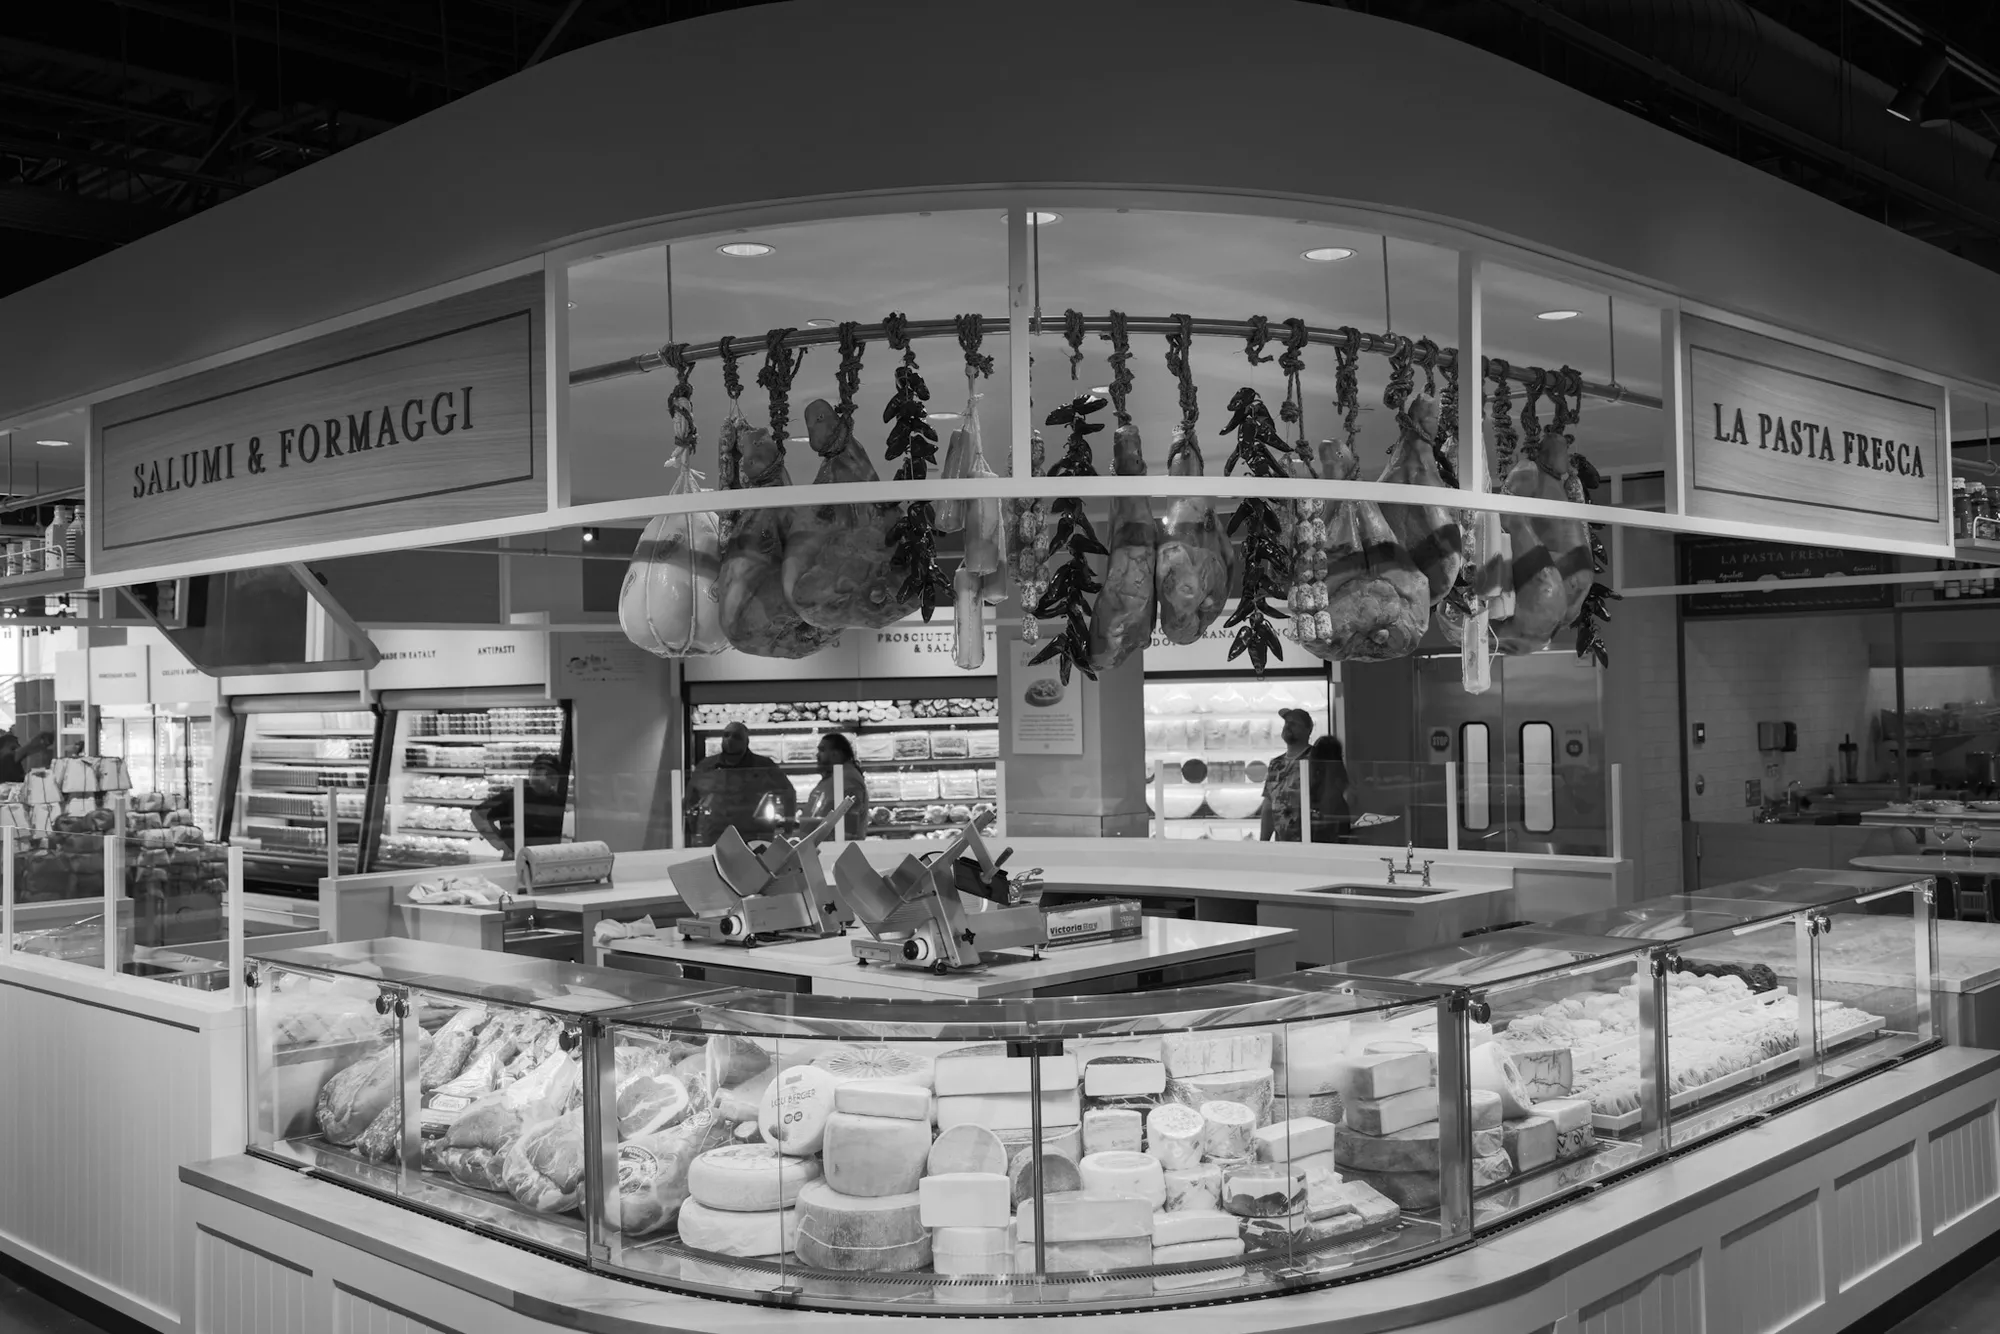 Eataly at CF Sherway Gardens to Open November 2 - Foodservice and  Hospitality Magazine